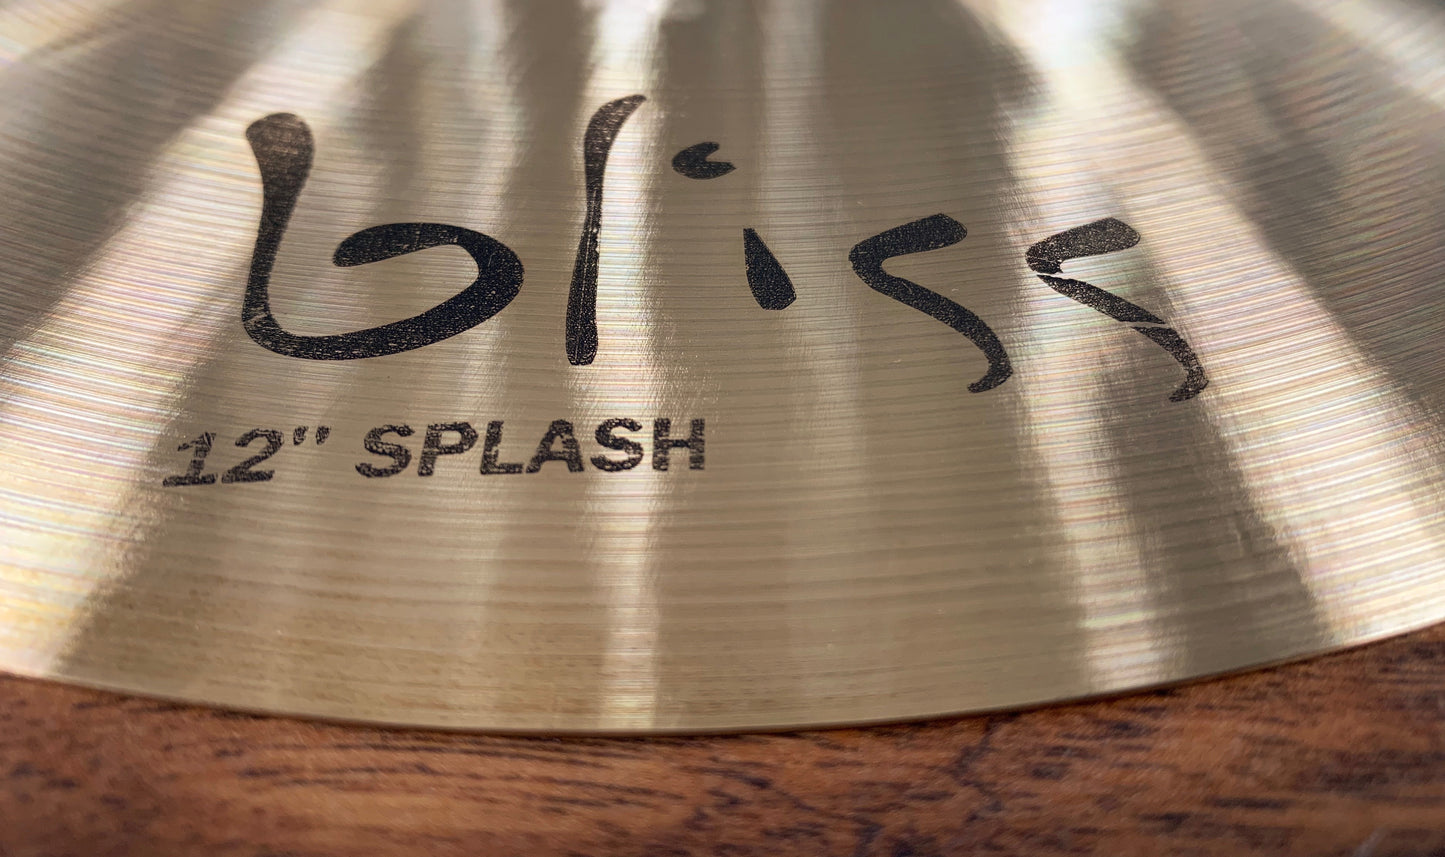 Dream Cymbals BSP12 Bliss Hand Forged & Hammered 12" Splash Cymbal